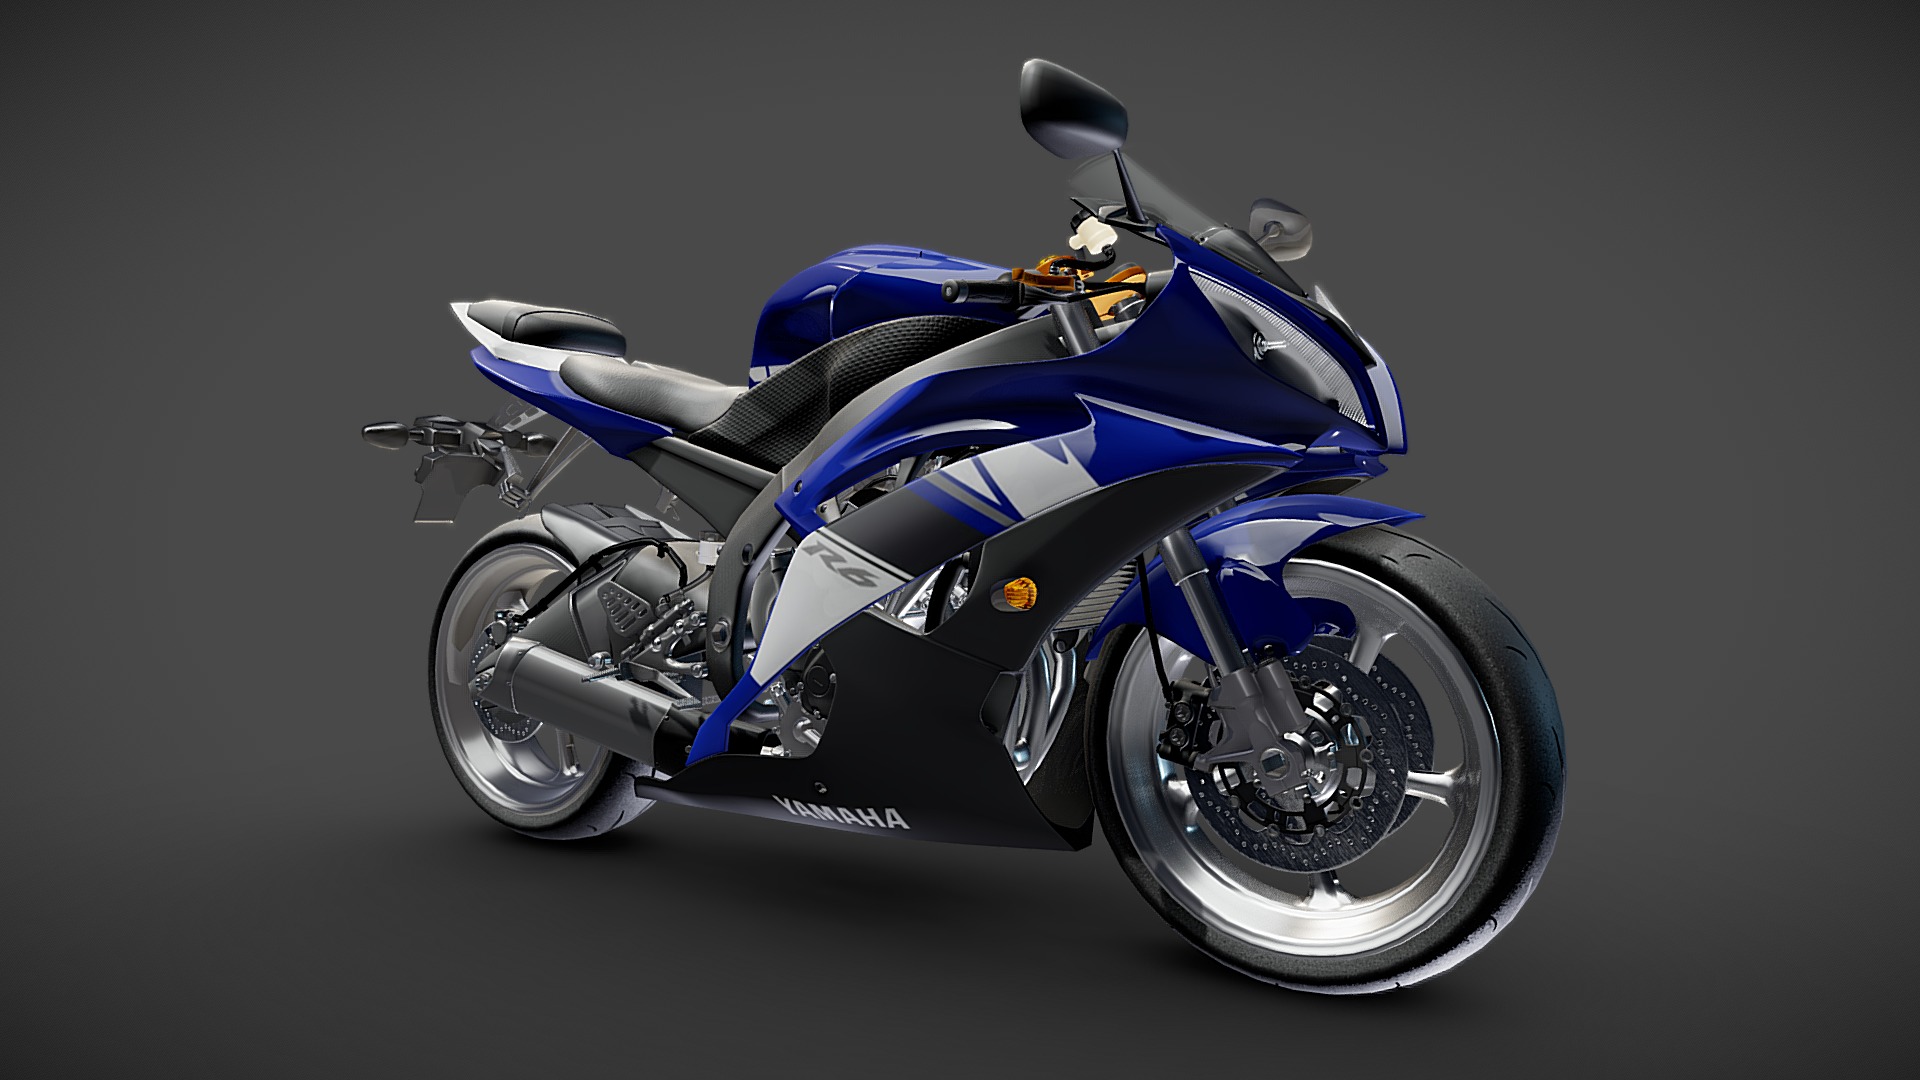 3D model Yamaha R6 - This is a 3D model of the Yamaha R6. The 3D model is about a blue and white motorcycle.